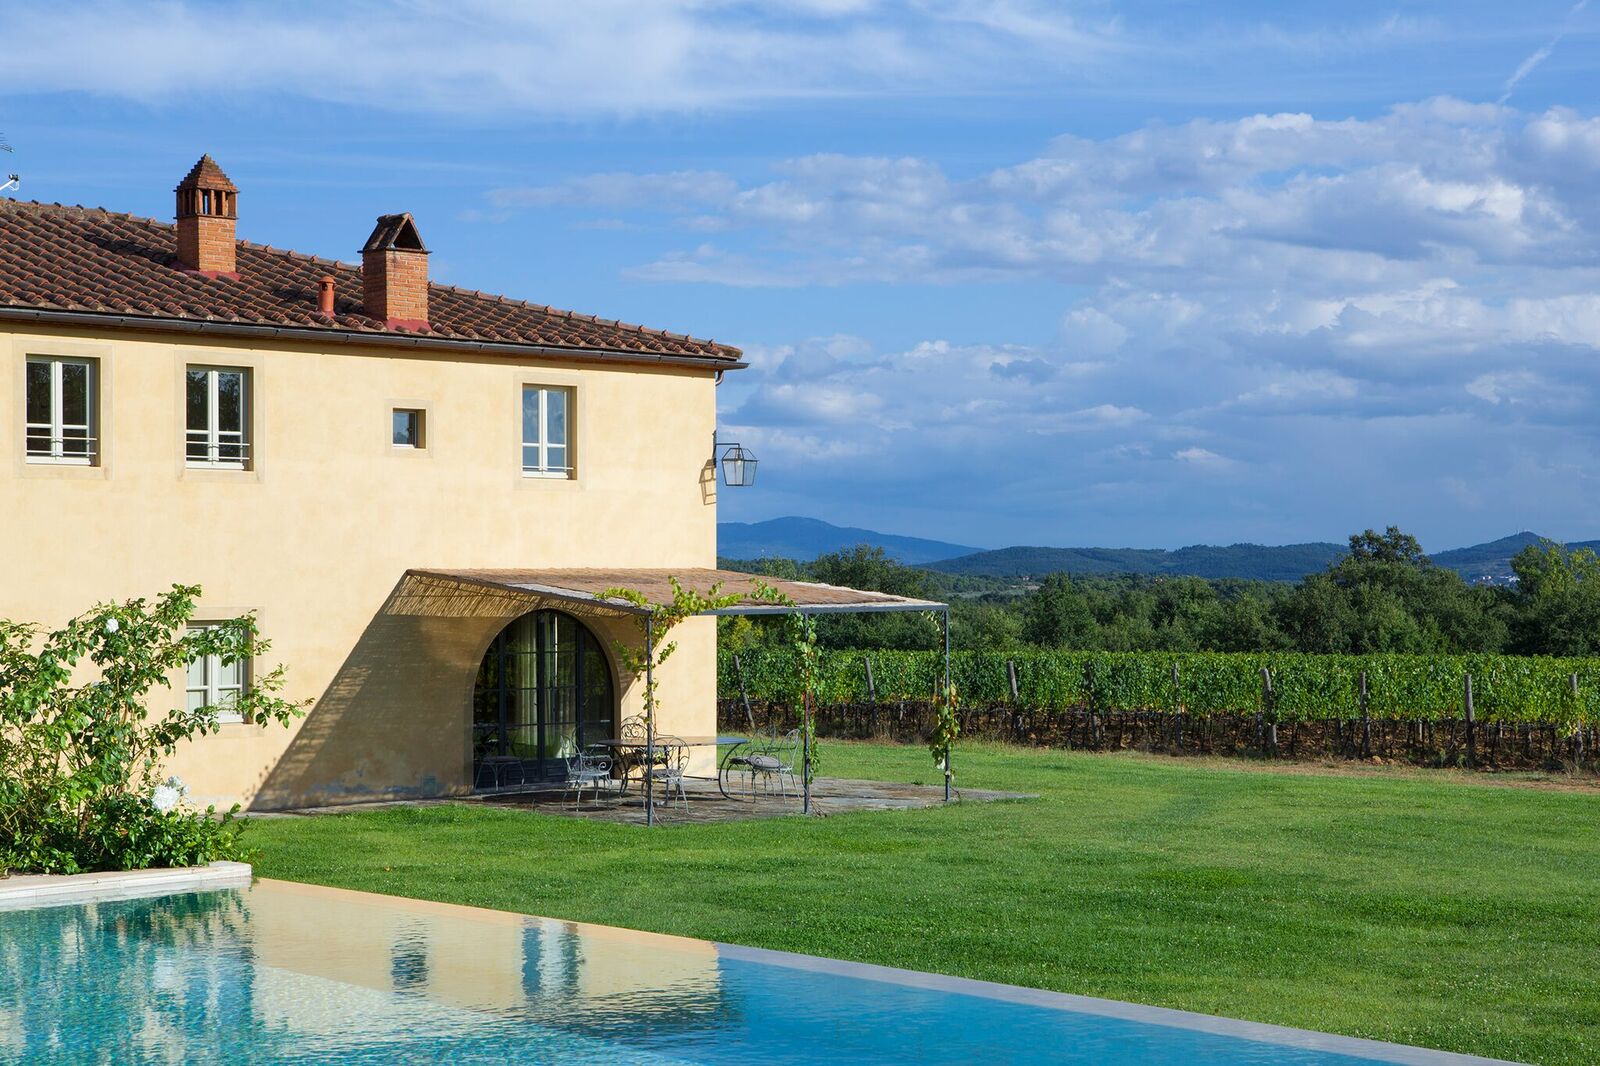 This Tuscan Hotel Keeps the Beauty of Nature and History Alive